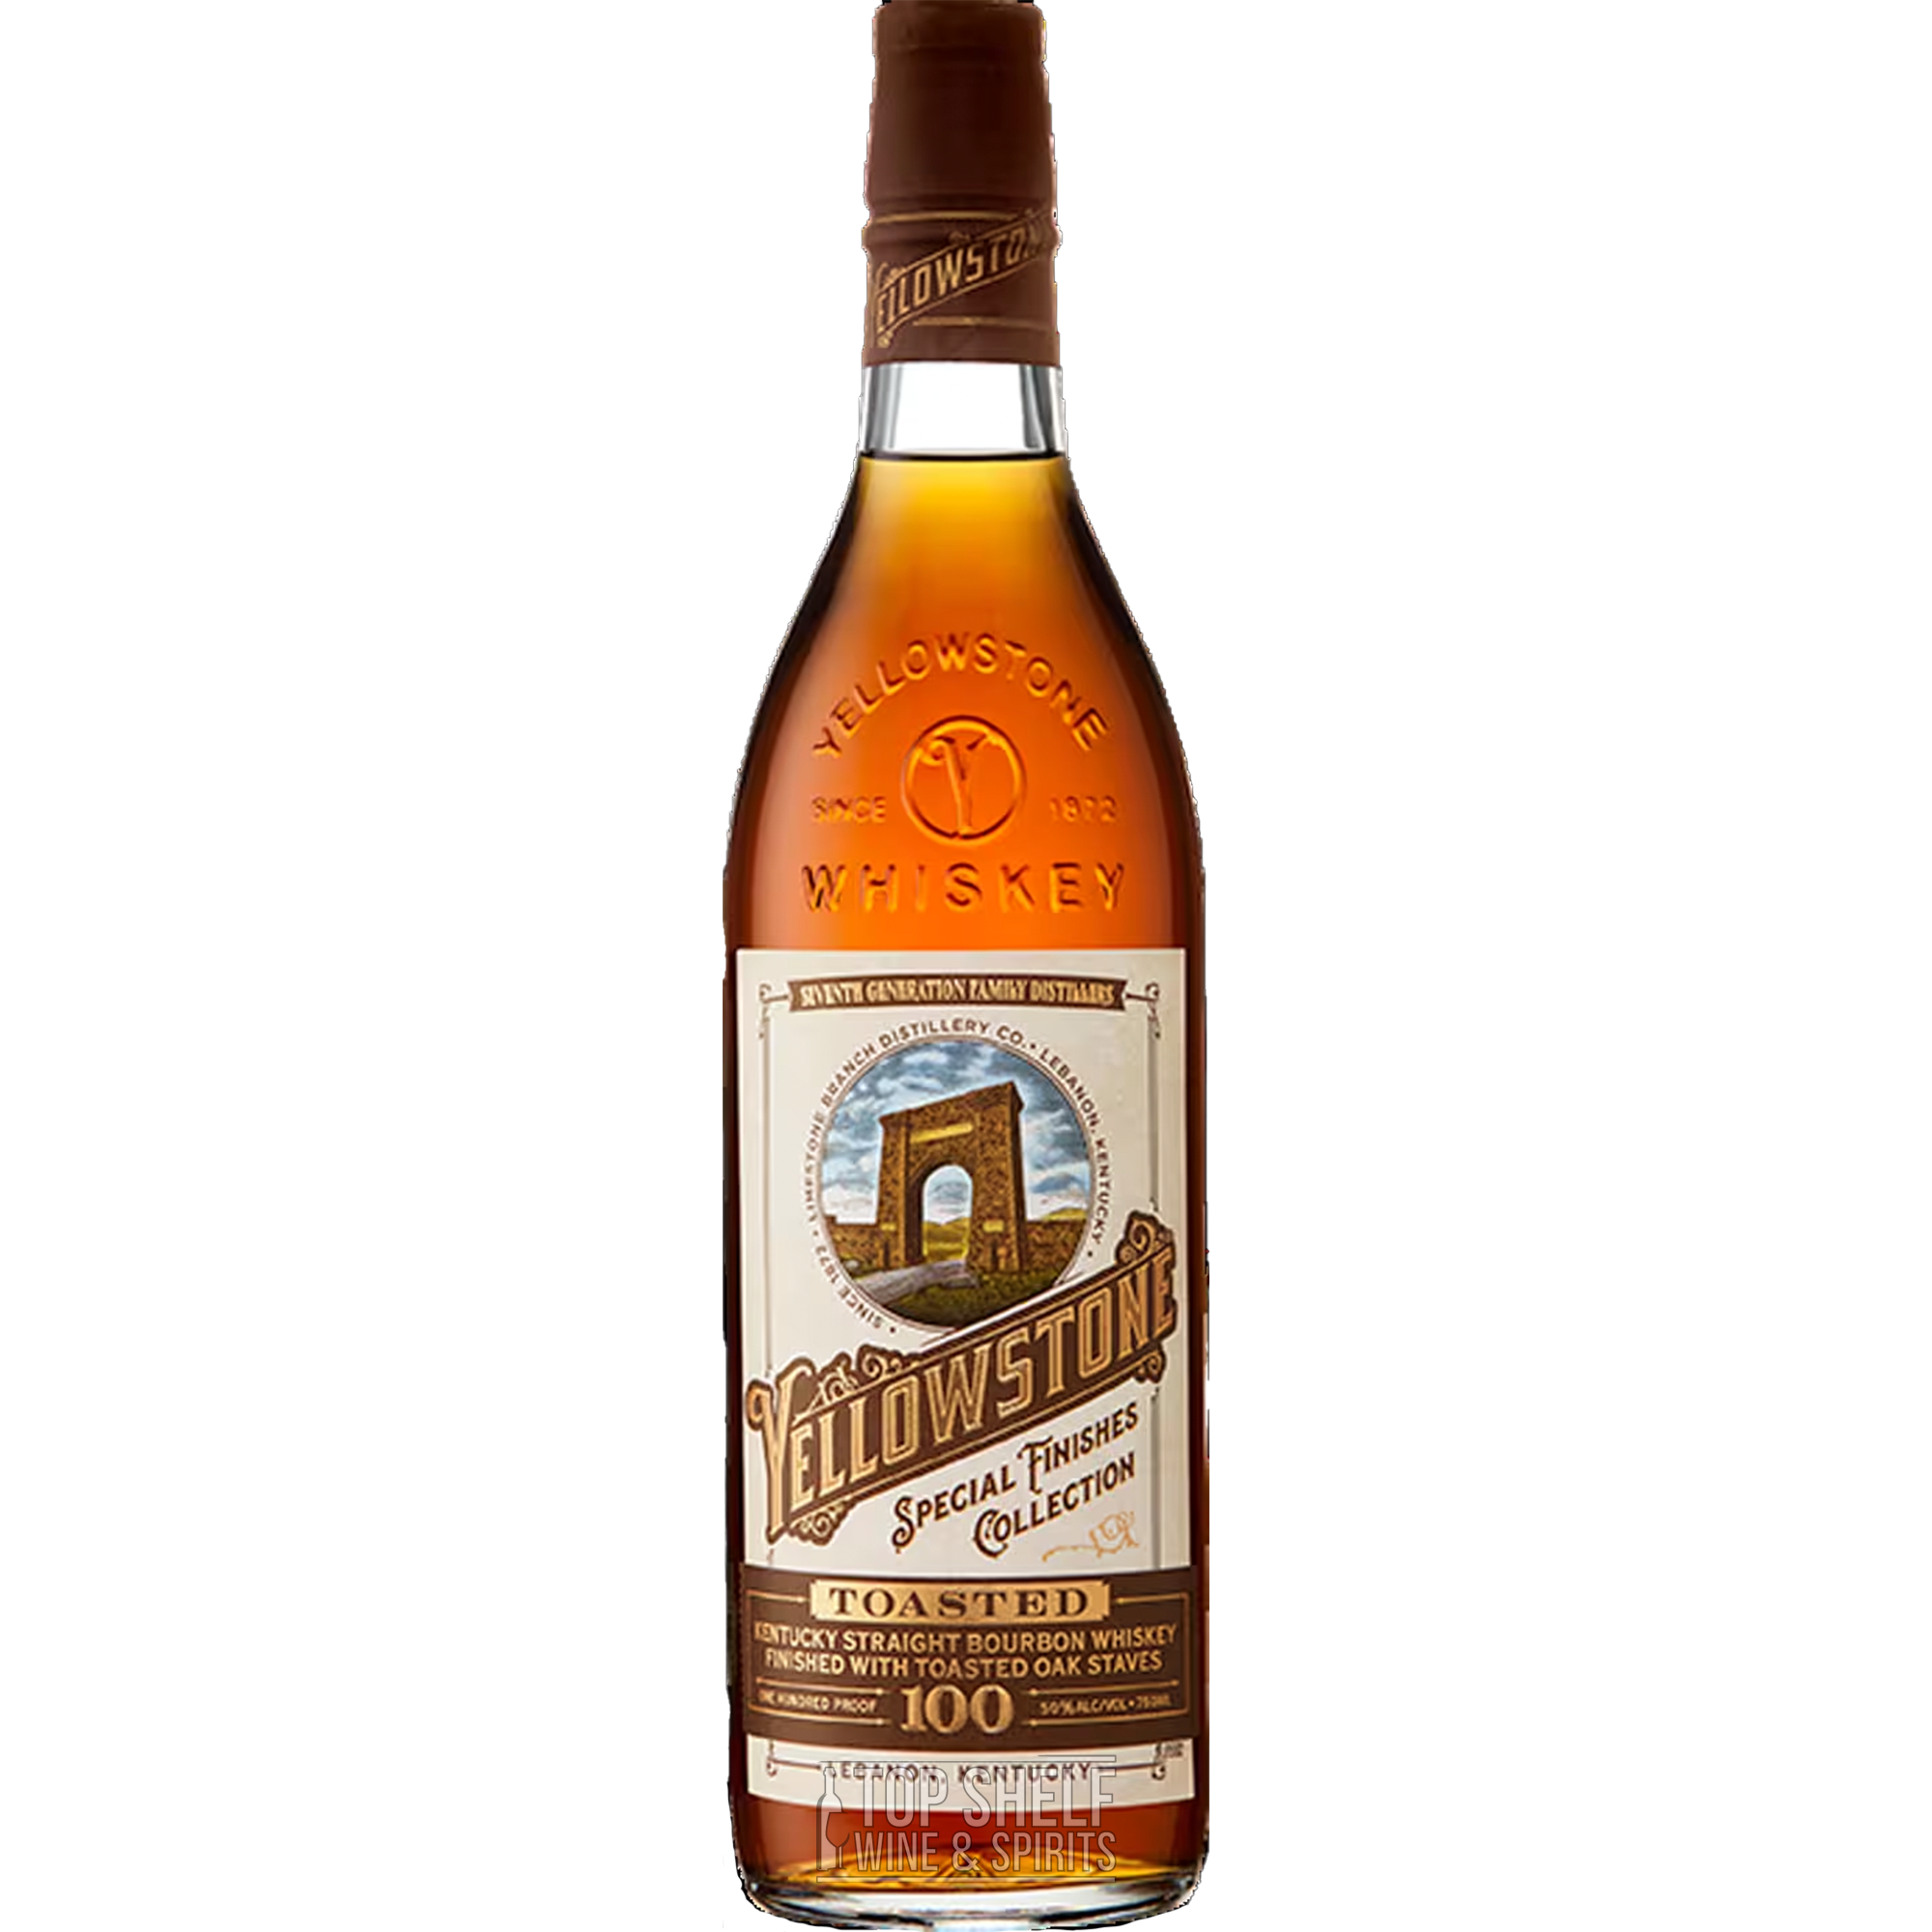 Yellowstone Toasted Special Finishes Collections Bourbon